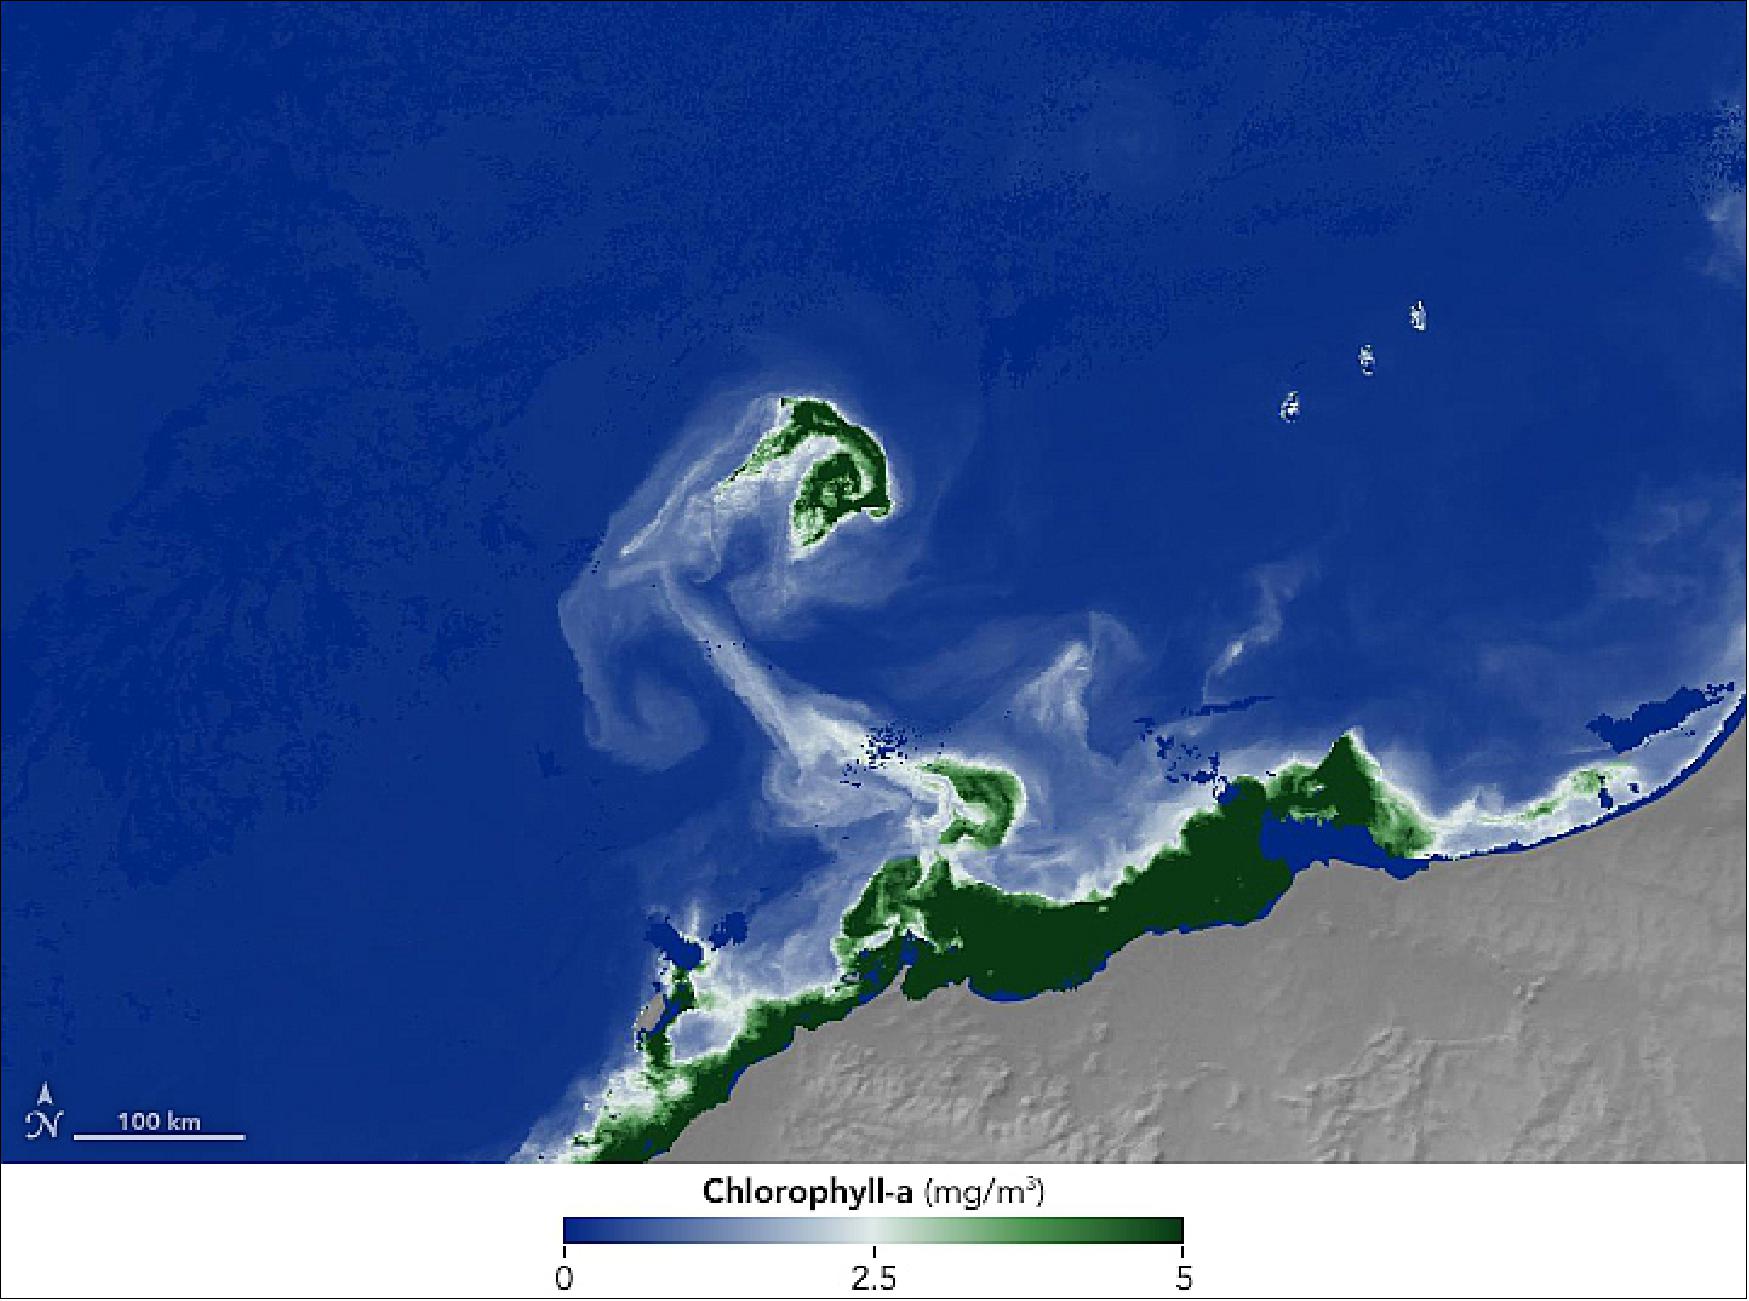 Figure 55: The Australian Bureau of Meteorology reported that a phytoplankton bloom was taking place at the time. This image shows concentrations of chlorophyll, the pigment that phytoplankton use to harvest sunlight, as derived by the Moderate Resolution Imaging Spectroradiometer (MODIS) on March 29, 2019 (image credit: NASA Earth Observatory, image by Lauren Dauphin, using MODIS data from NASA EOSDIS/LANCE and GIBS/Worldview. Story by Kasha Patel)